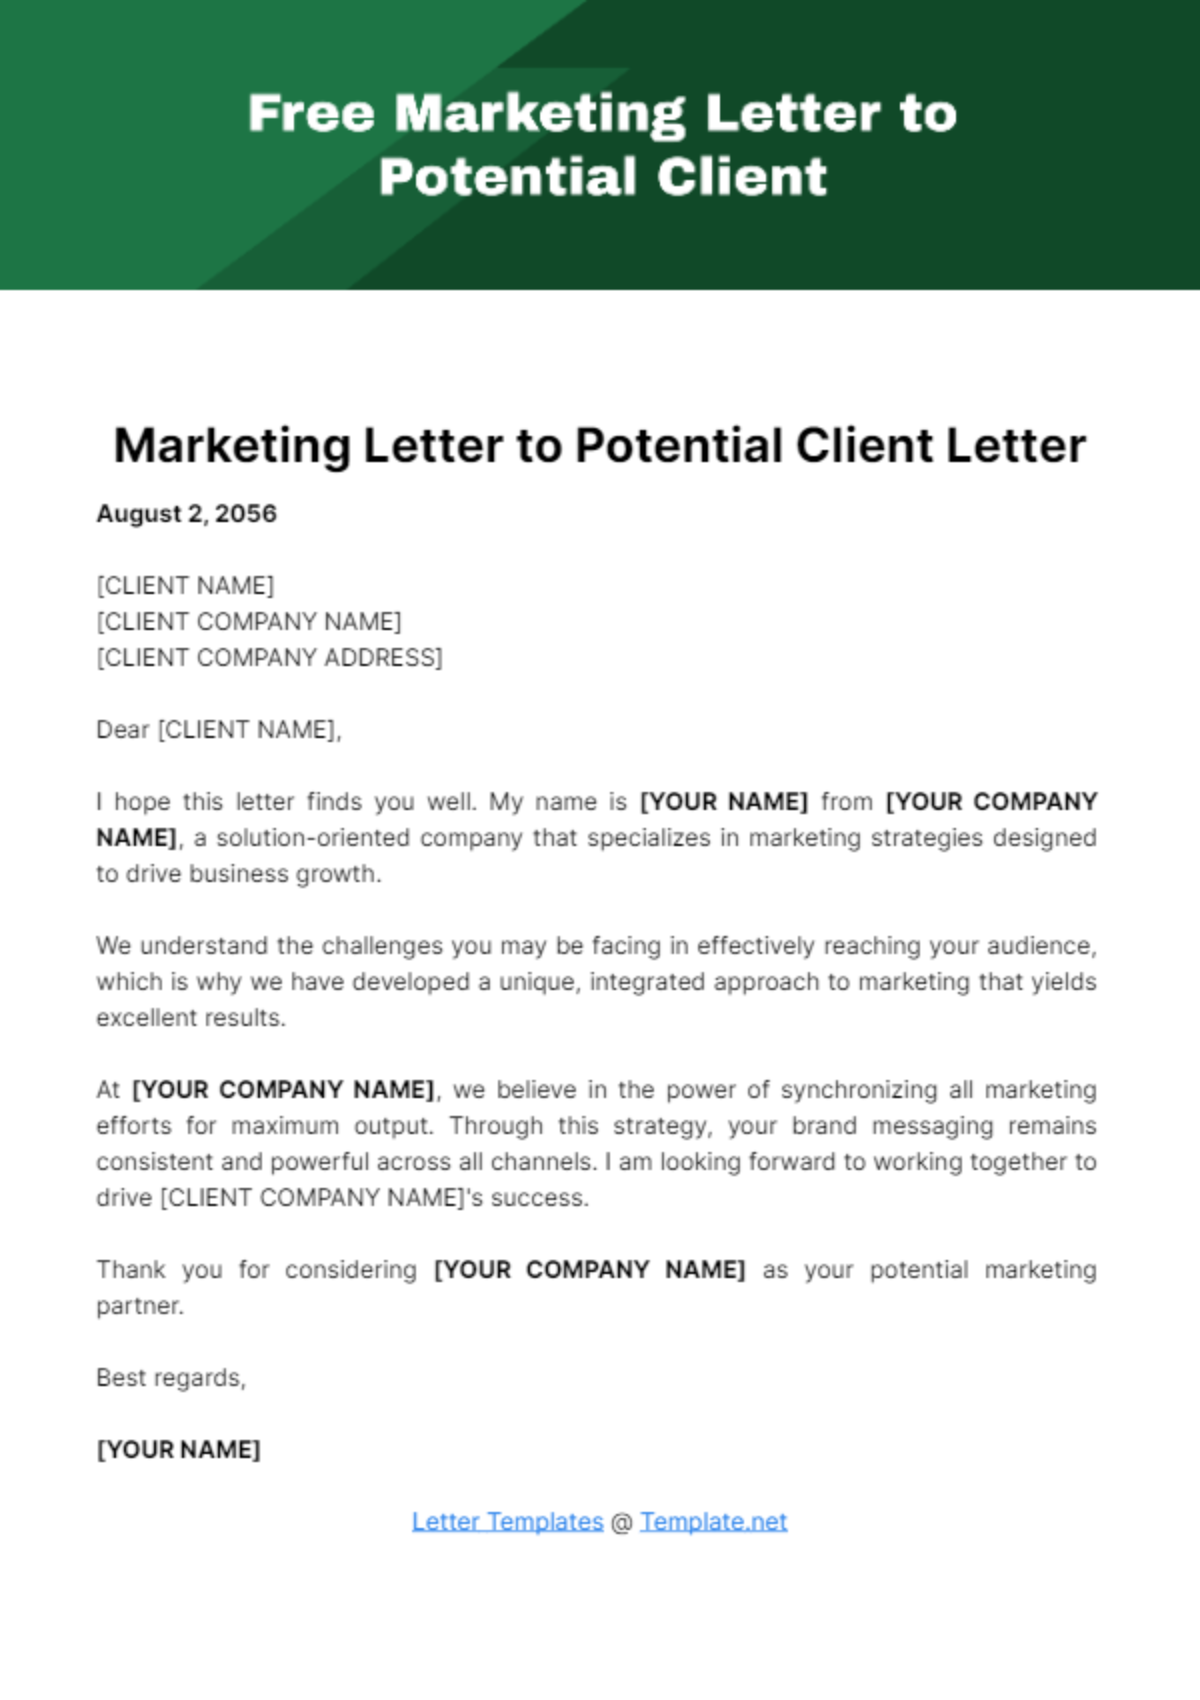 Marketing Letter to Potential Client Template